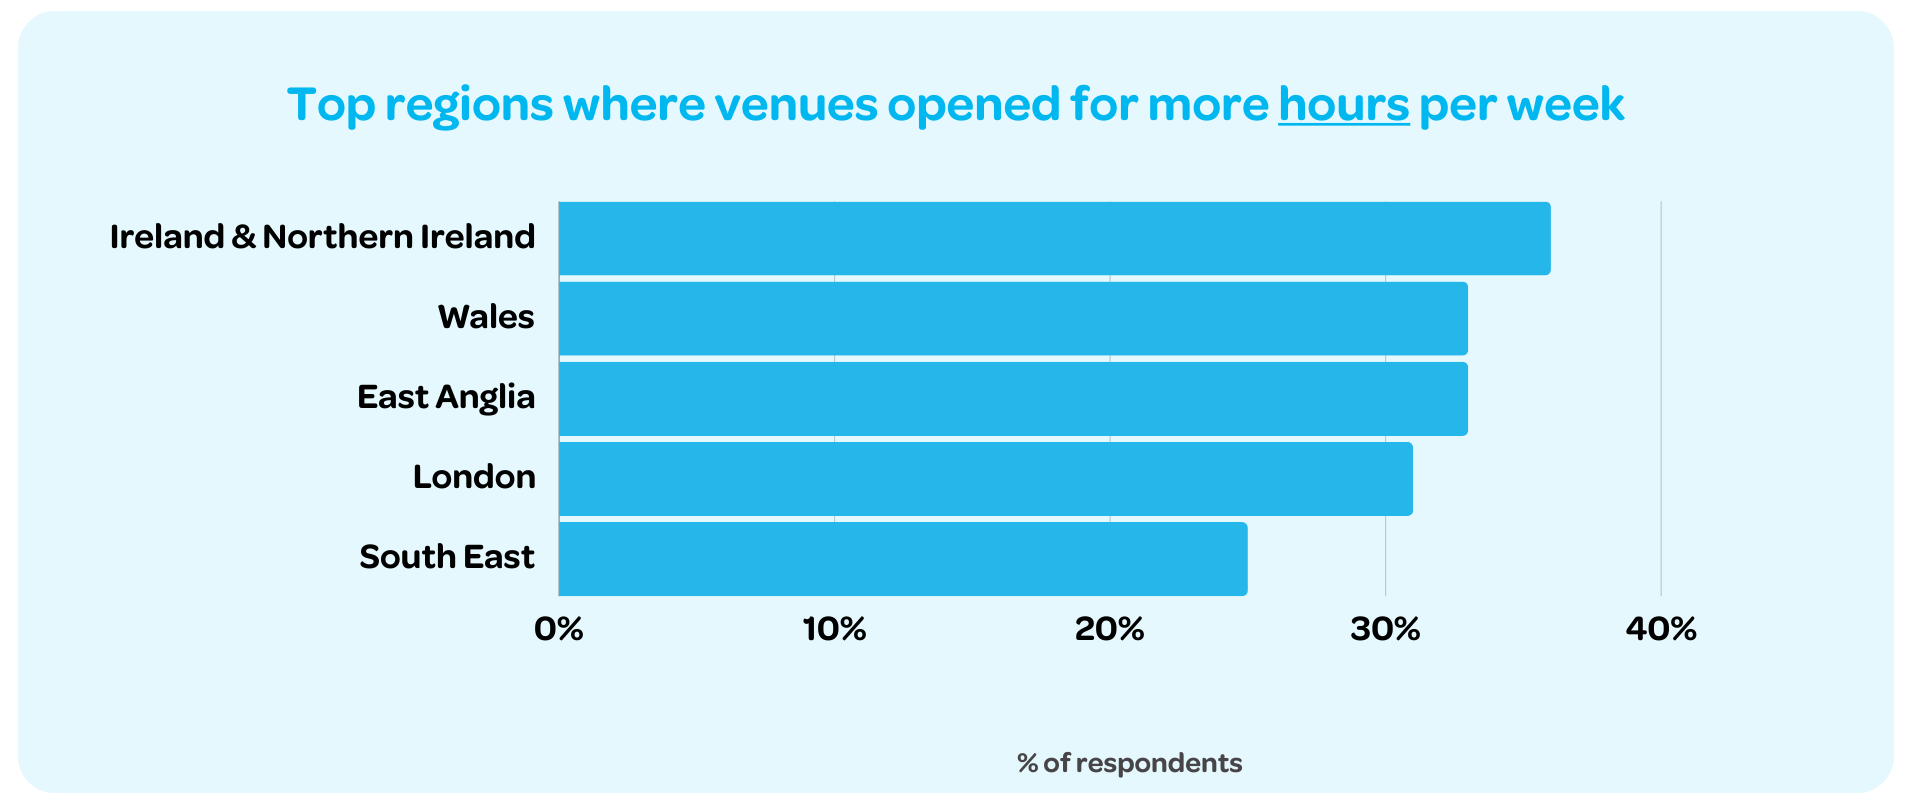 Ireland and Northern Ireland was where the most venues opened for more hours per week in 2023